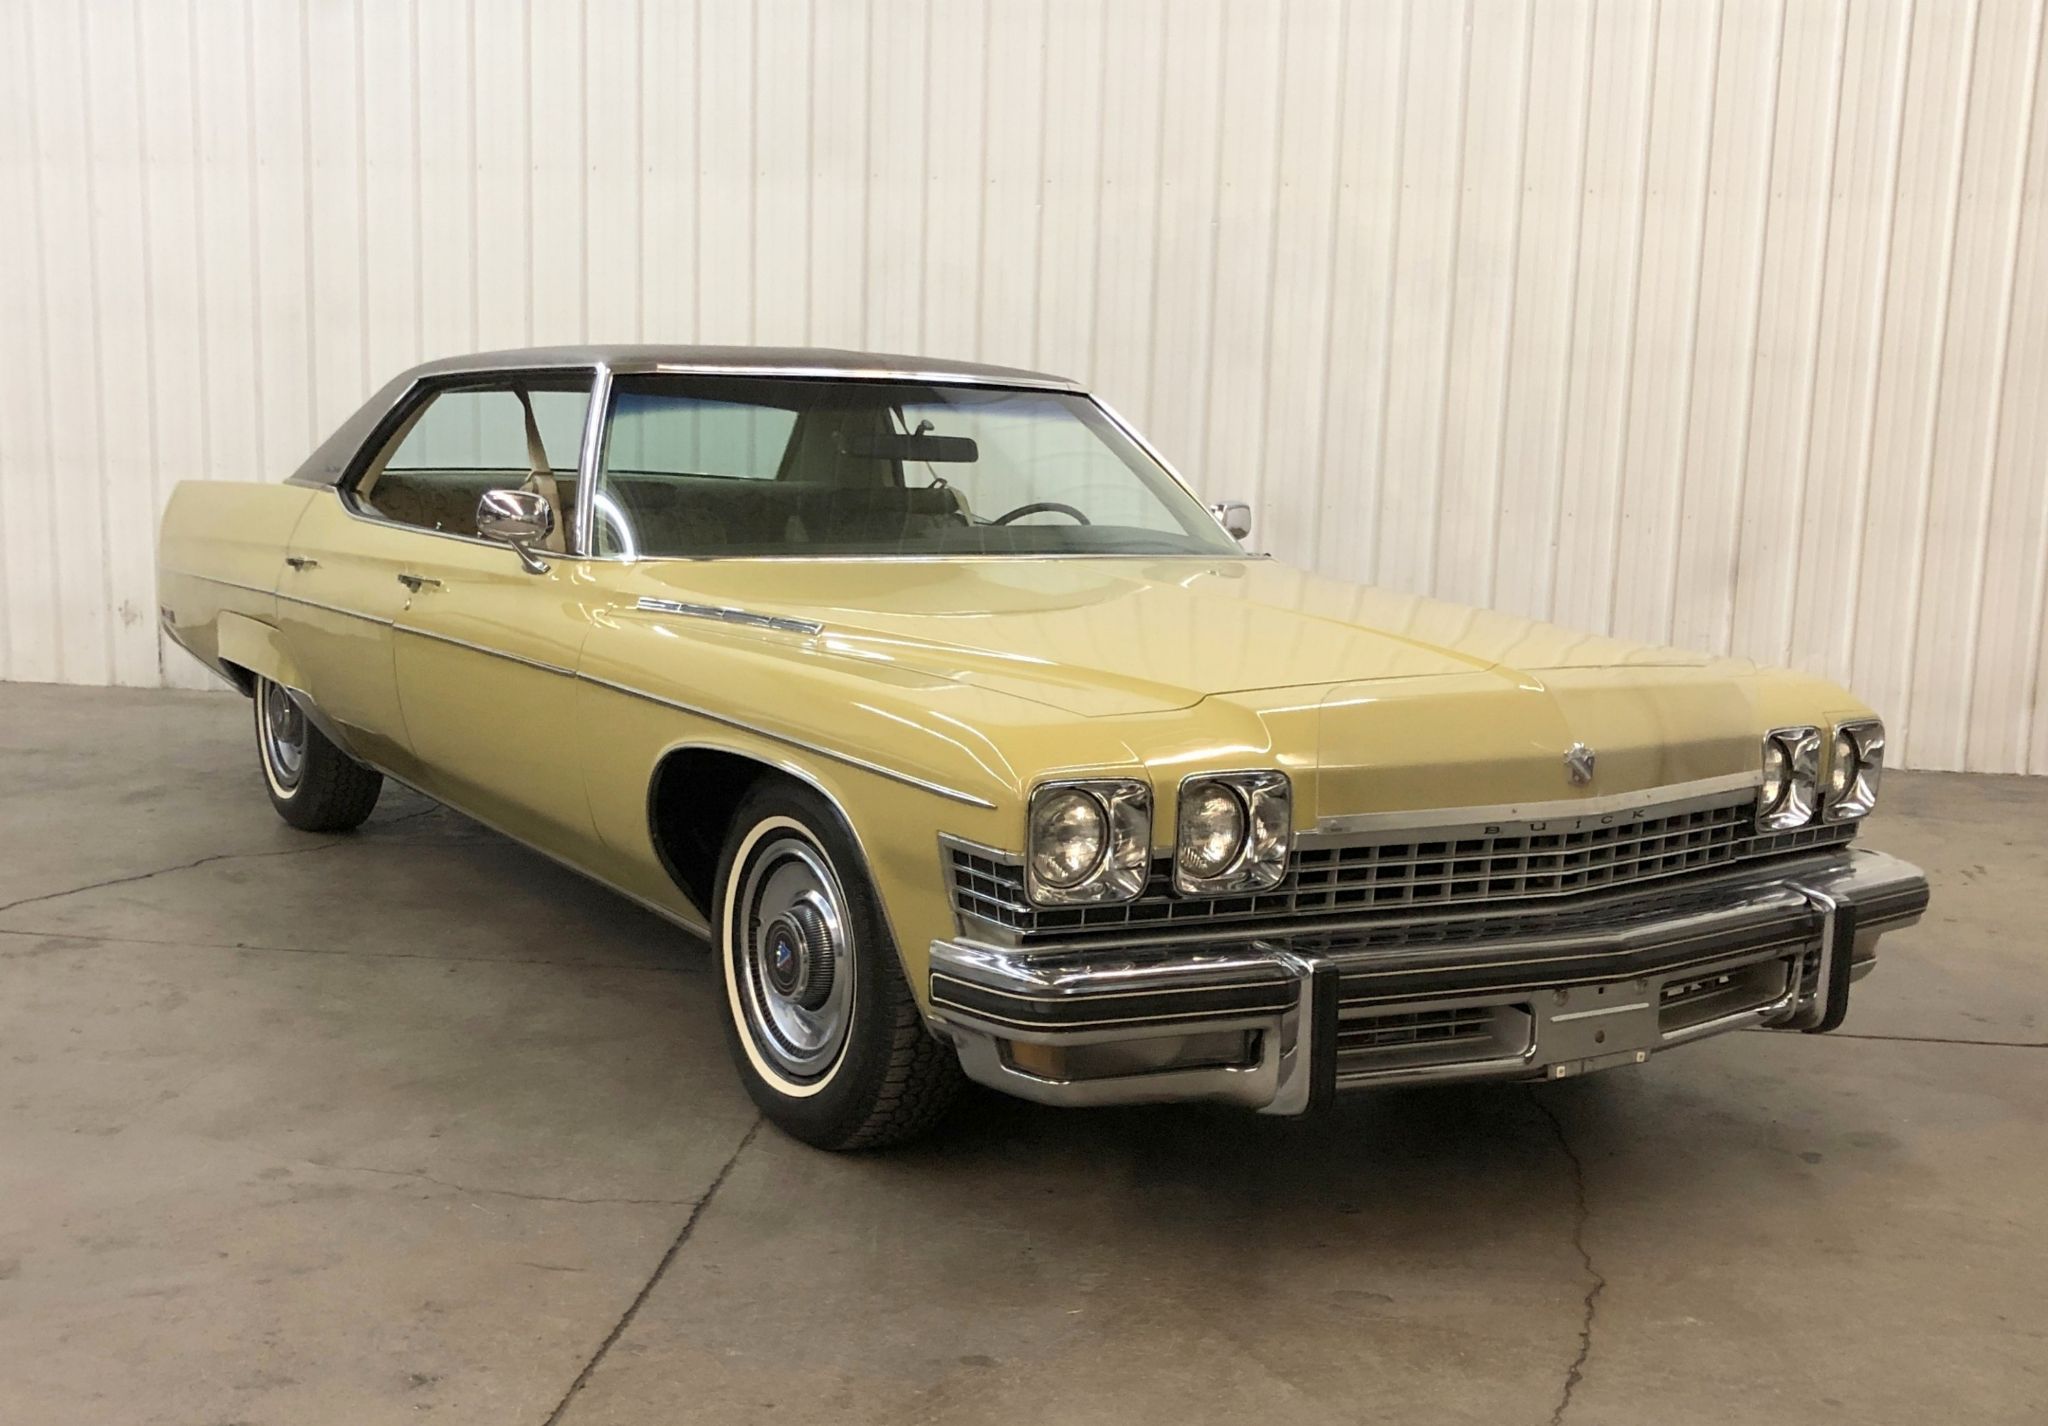  Buick Electra 225